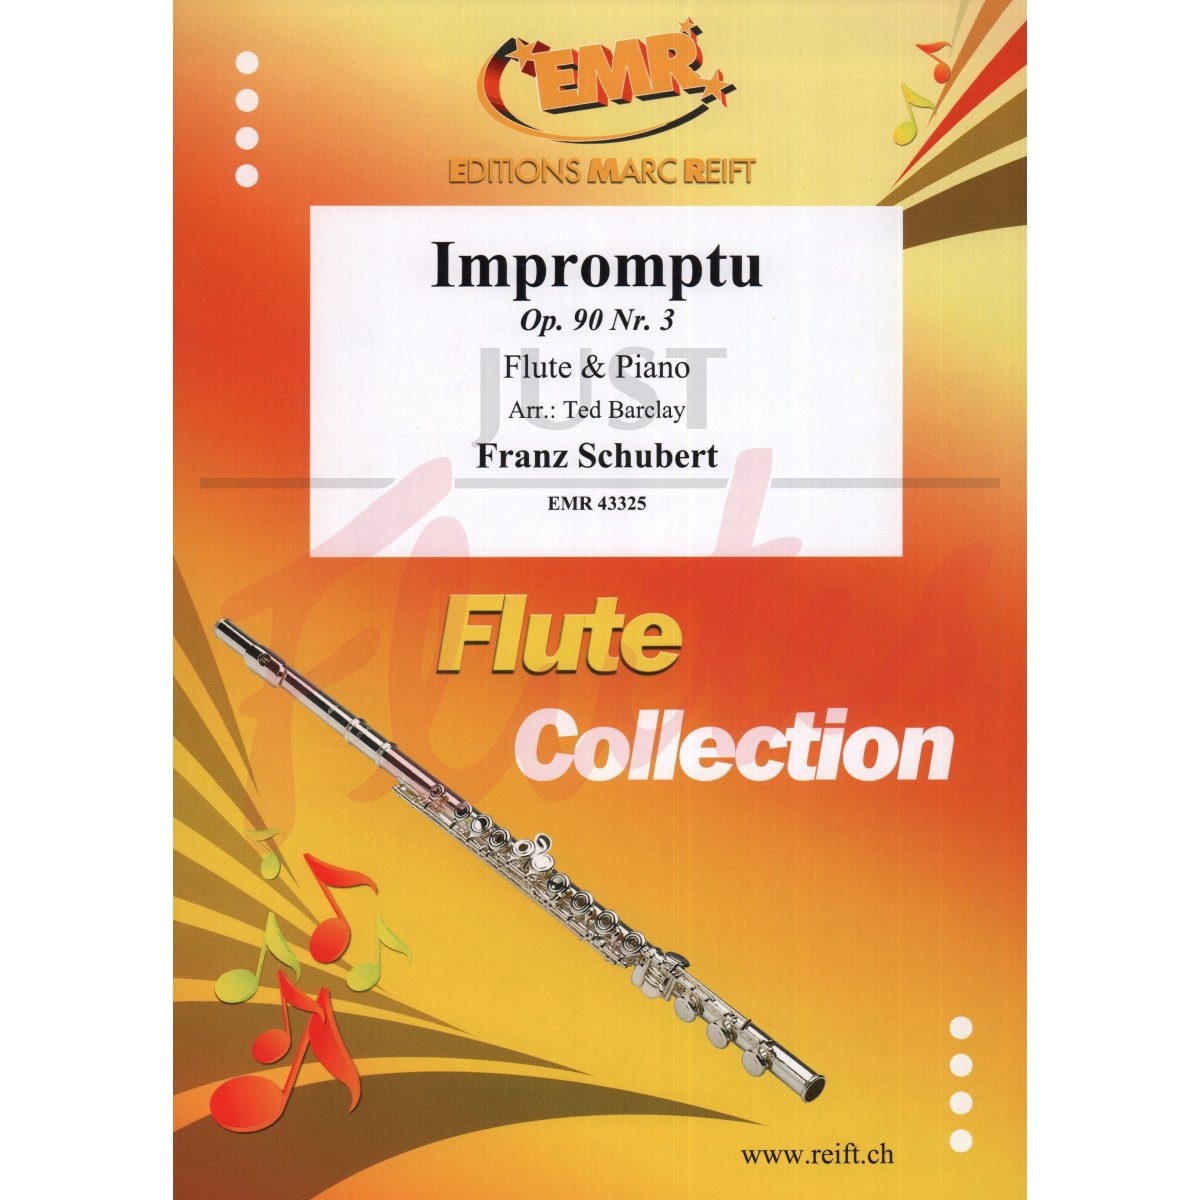 Impromptu for Flute and Piano